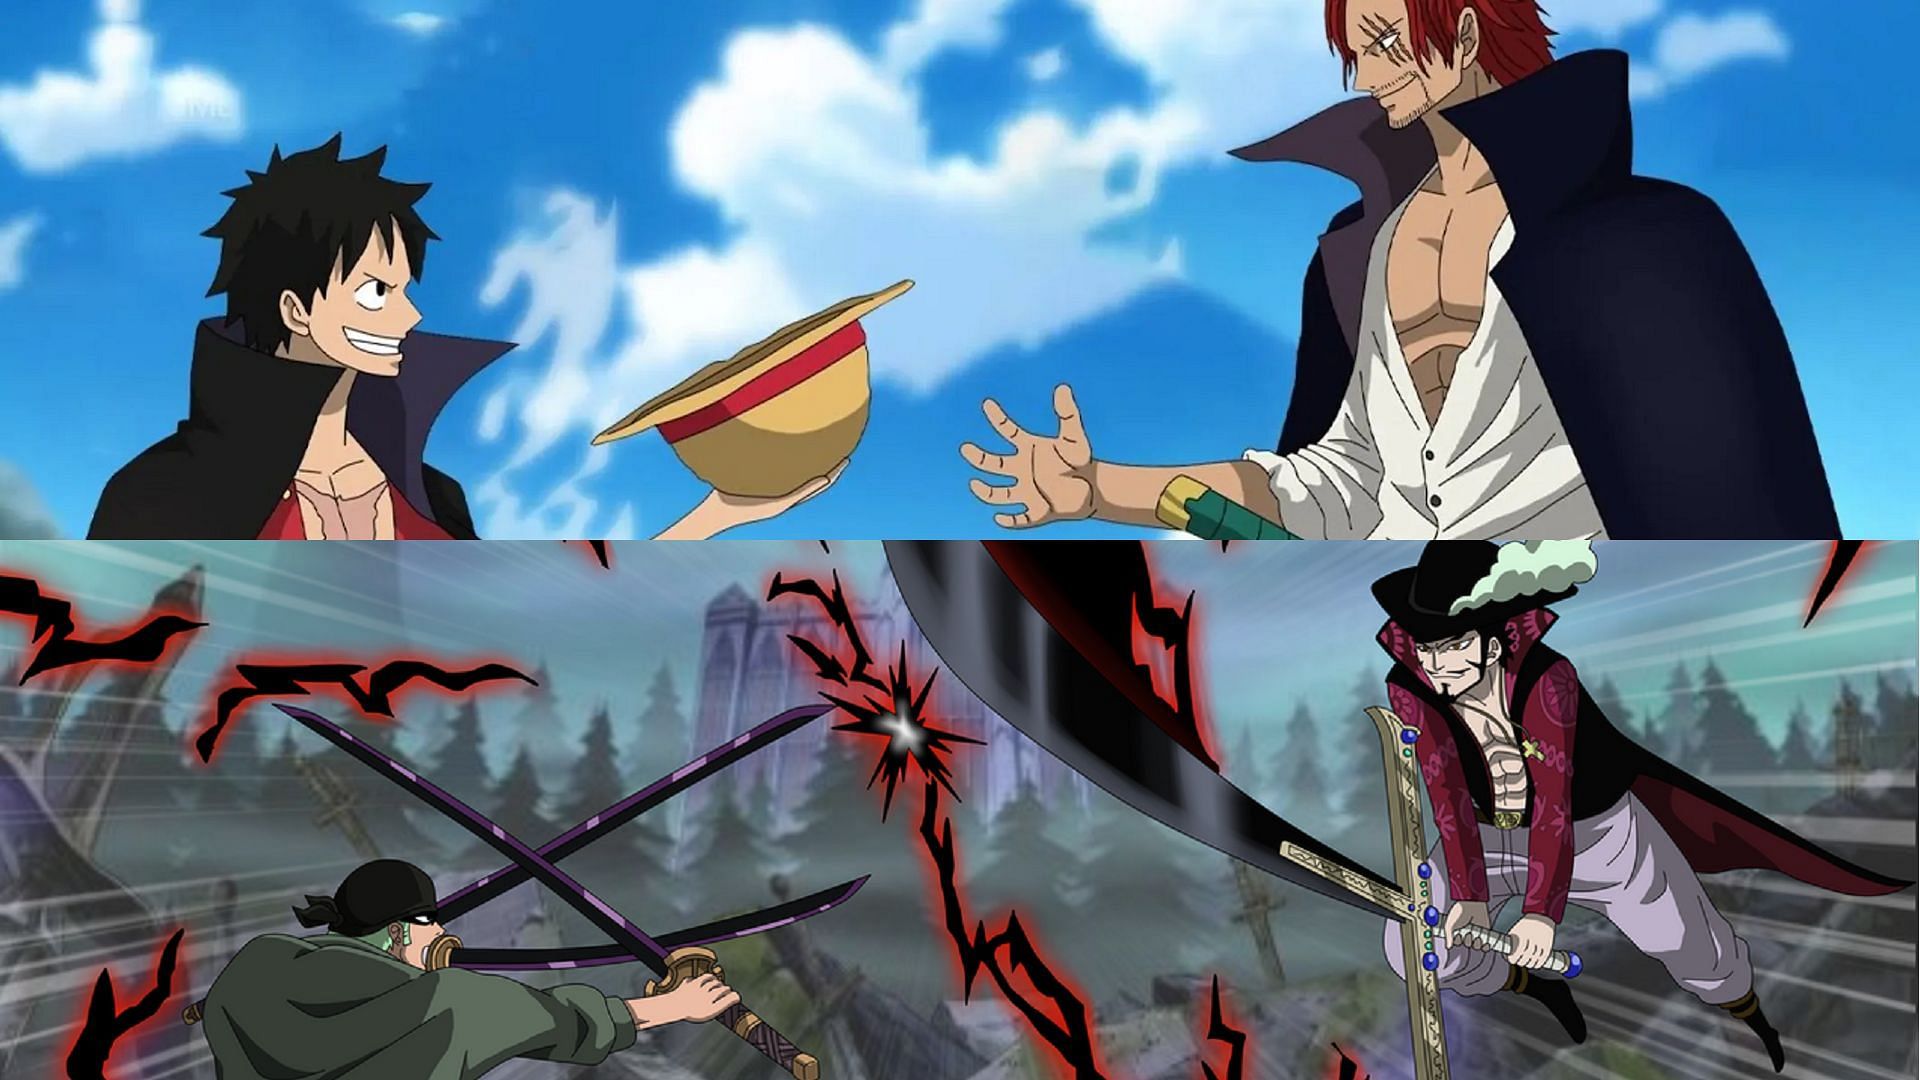 The fates of Luffy and Zoro are intertwined with those of Shanks and Mihawk (Image via Eiichiro Oda/Shueisha, One Piece)